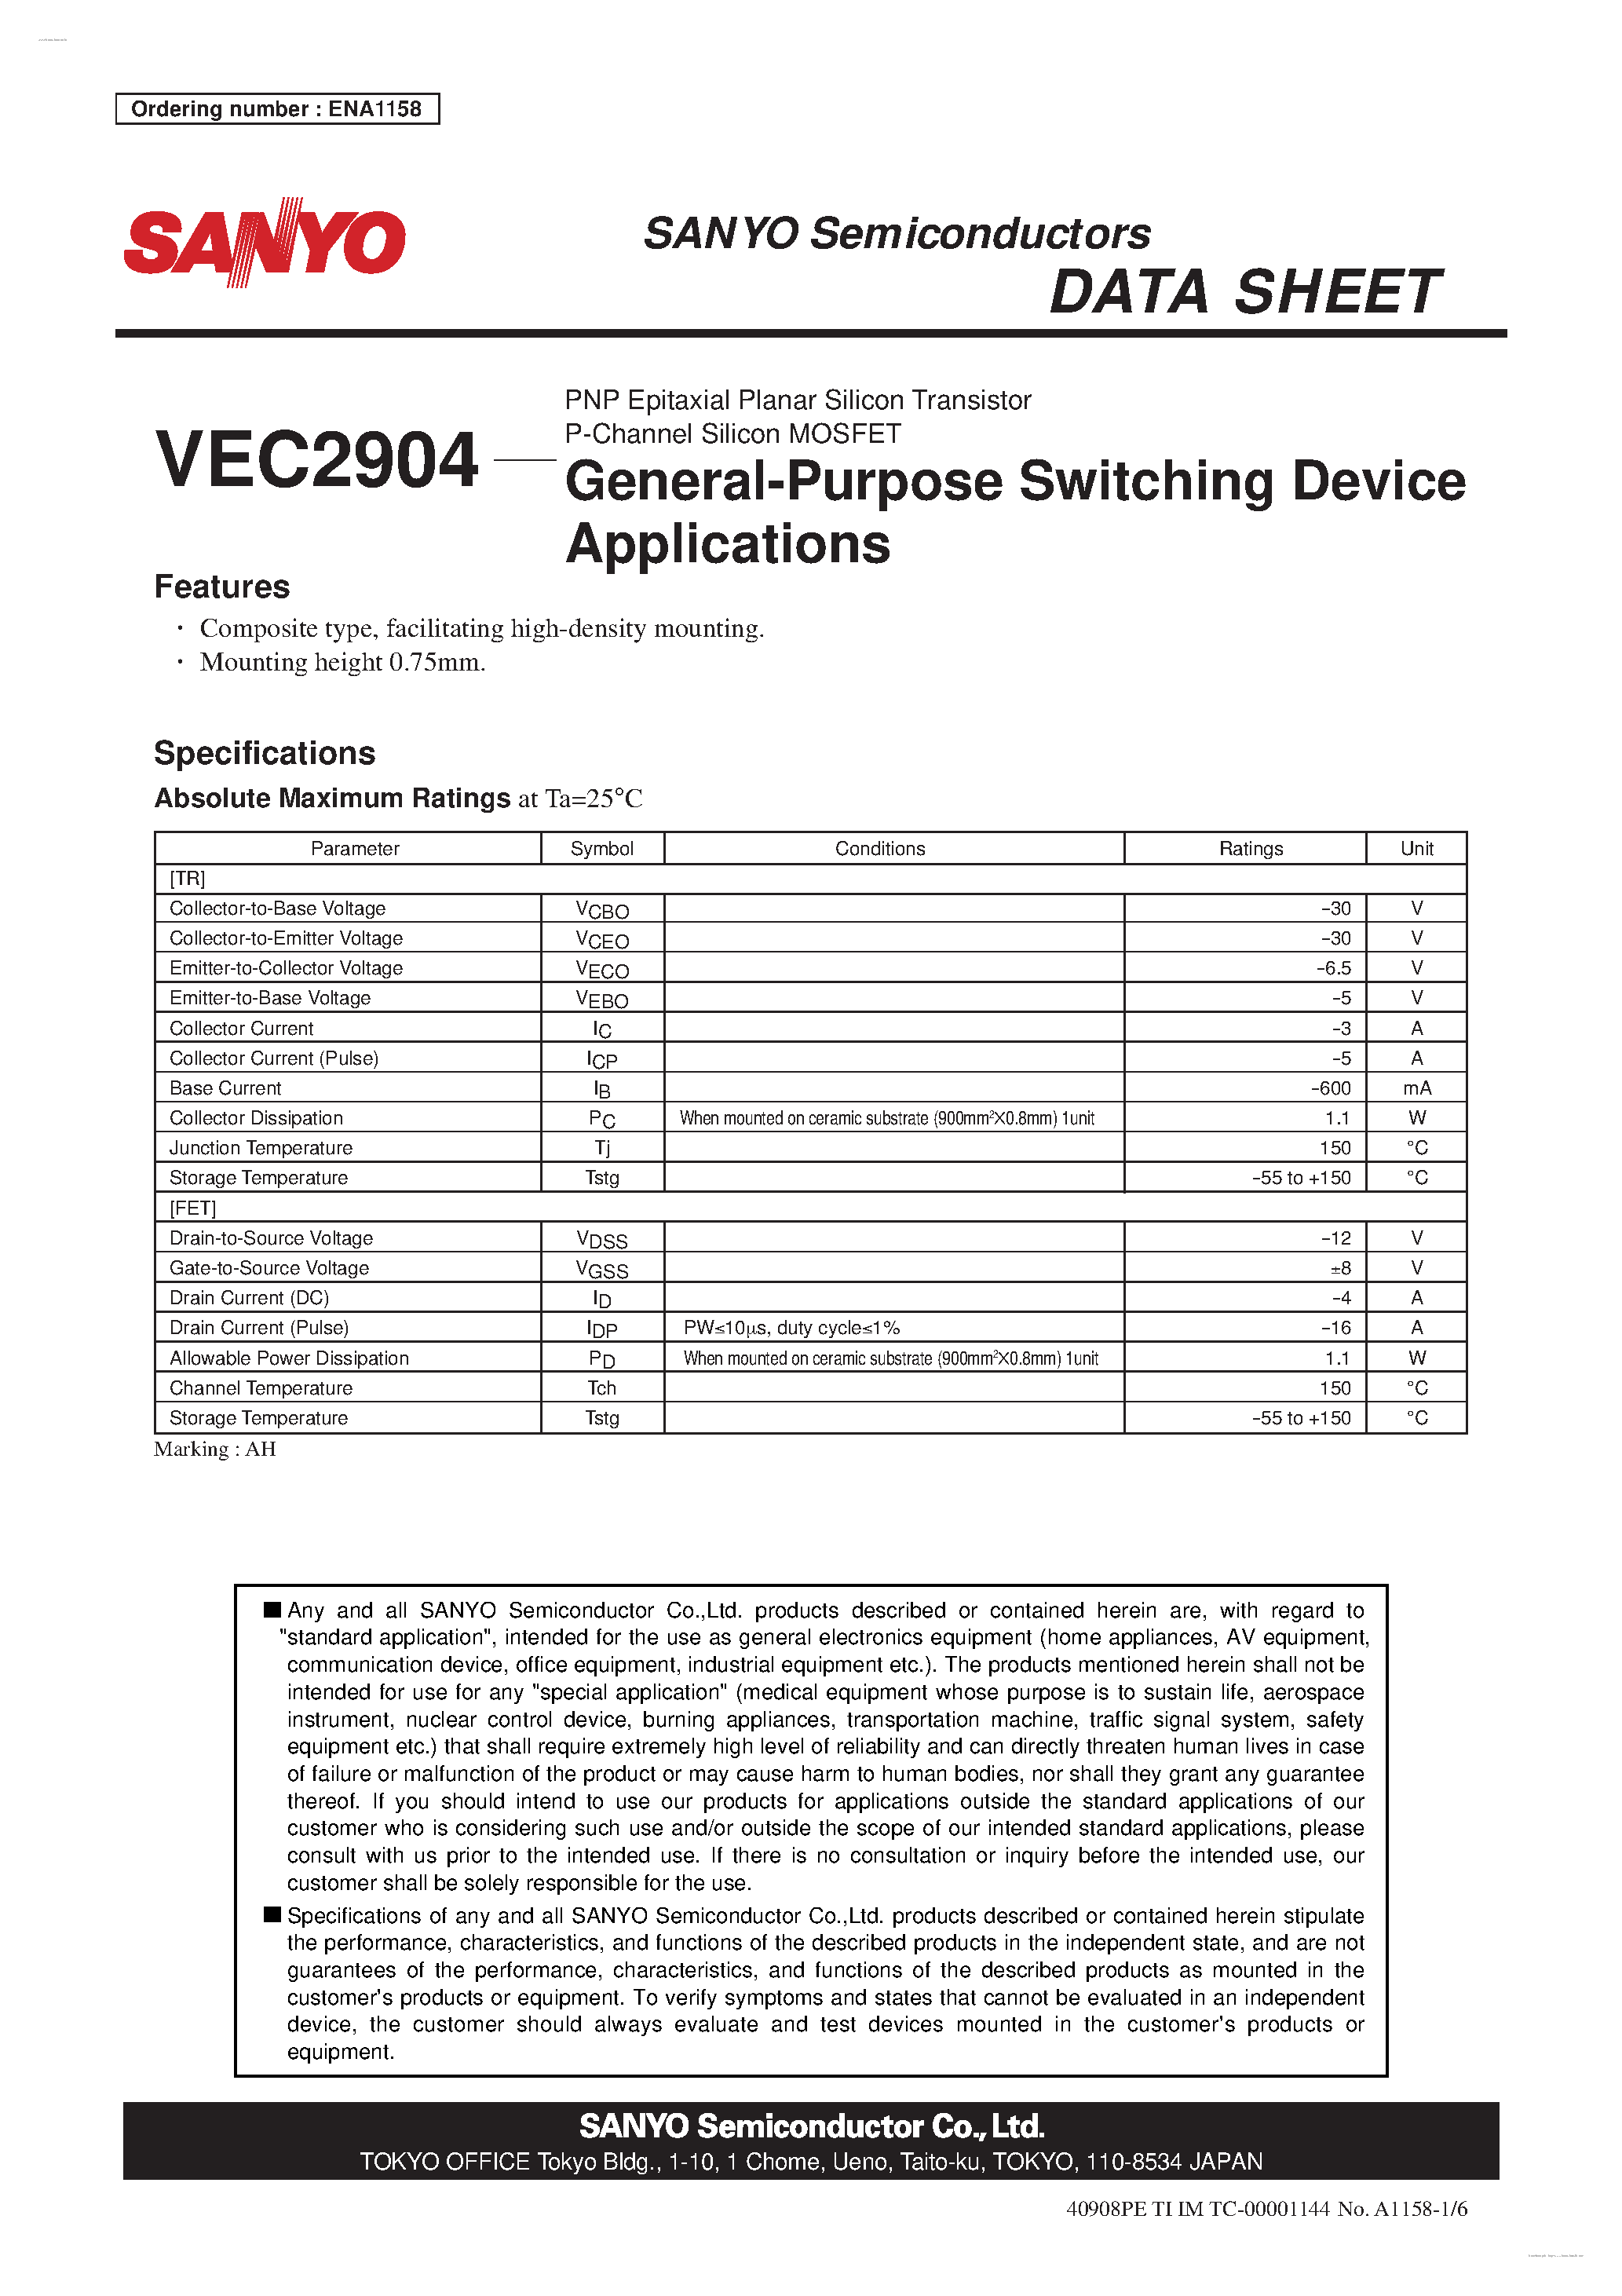 Datasheet VEC2904 - P-Channel Silicon MOSFET page 1